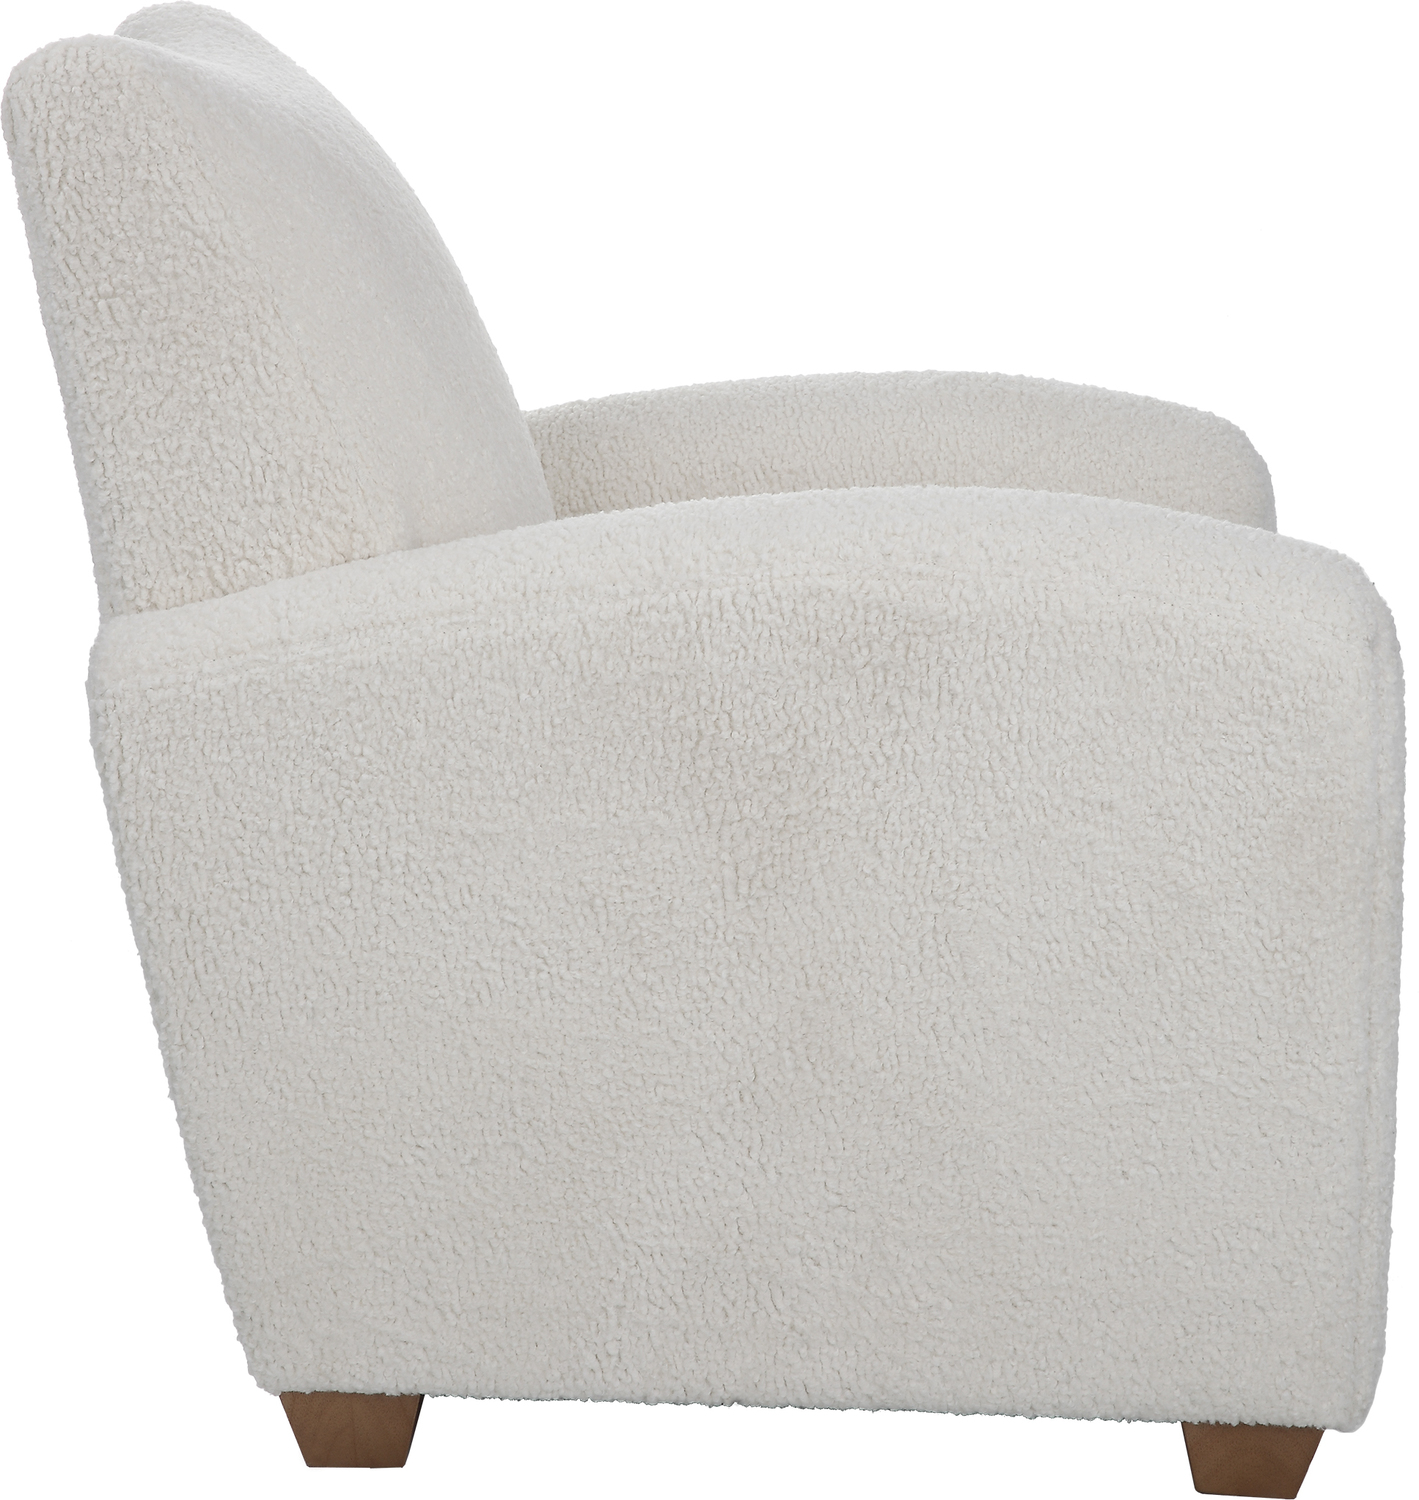 small sitting chair for living room Uttermost  Accent Chairs & Armchairs With Its Curved Track Arms And Supportive Back, This Cozy Accent Chair Is The Perfect Balance Of Comfort And Style.  Fully Upholstered In A Soft Off White Faux Shearling And Accented By Walnut Stained Wooden Feet. Seat Height Is 18".